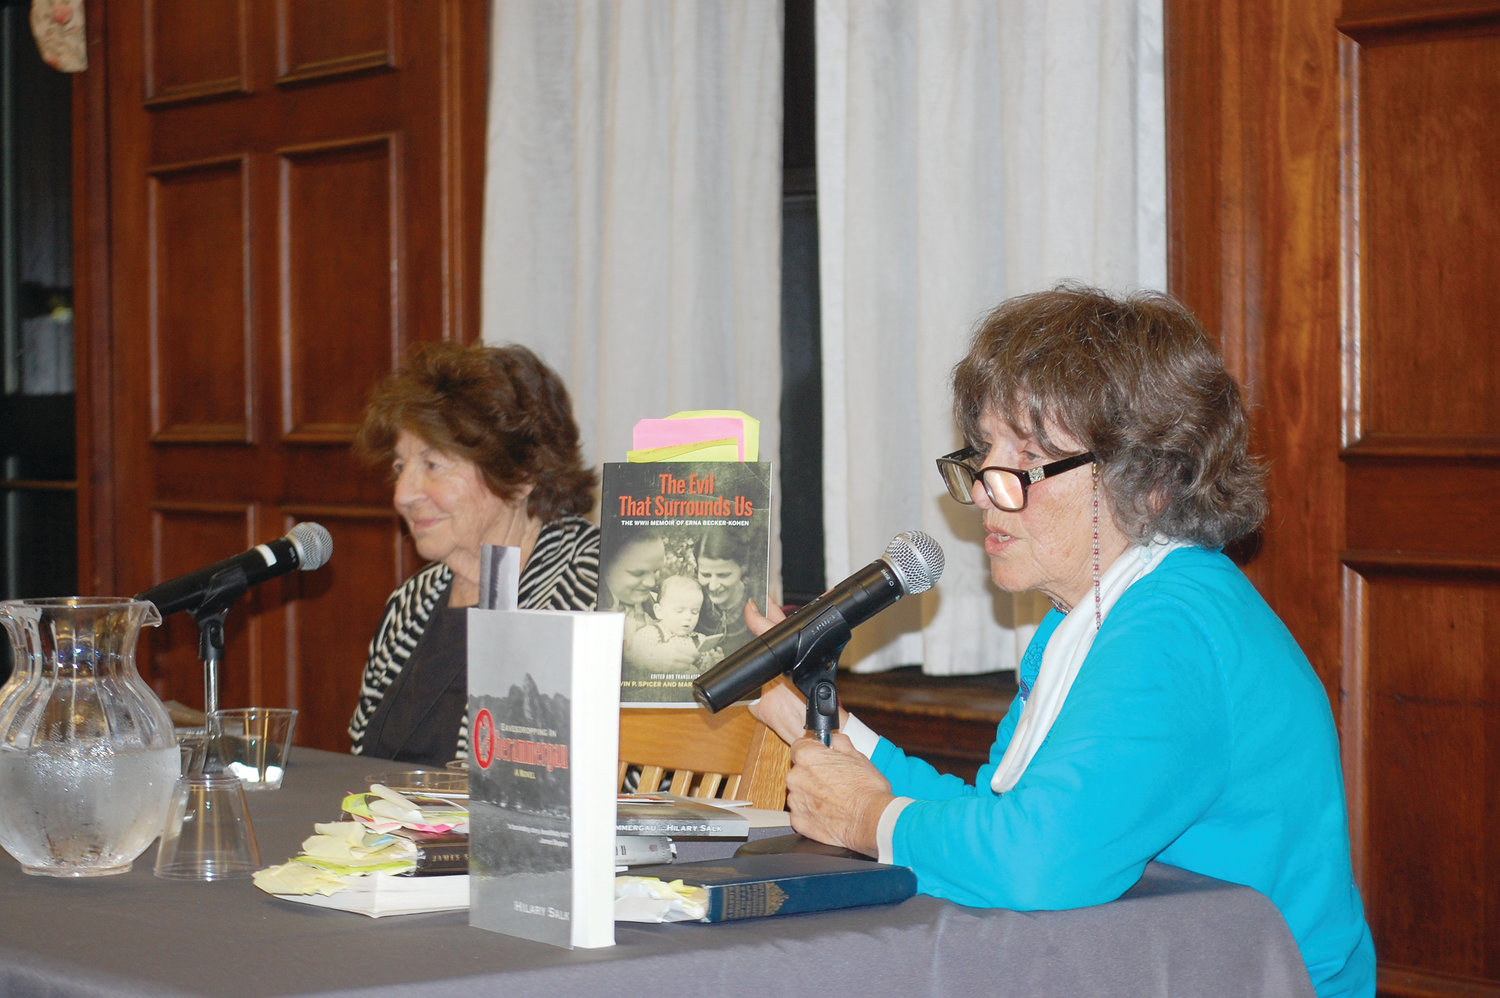 From left, Judith Banki, senior advisor on Interreligious Affairs, Tanenbaum Center For Interreligious Understanding, and Hilary Salk, author of “Eavesdropping in Oberammergau,” speak at PC’s Center for Catholic and Dominican Studies during the Jewish-Christian Theological Exchange on Oct. 24.